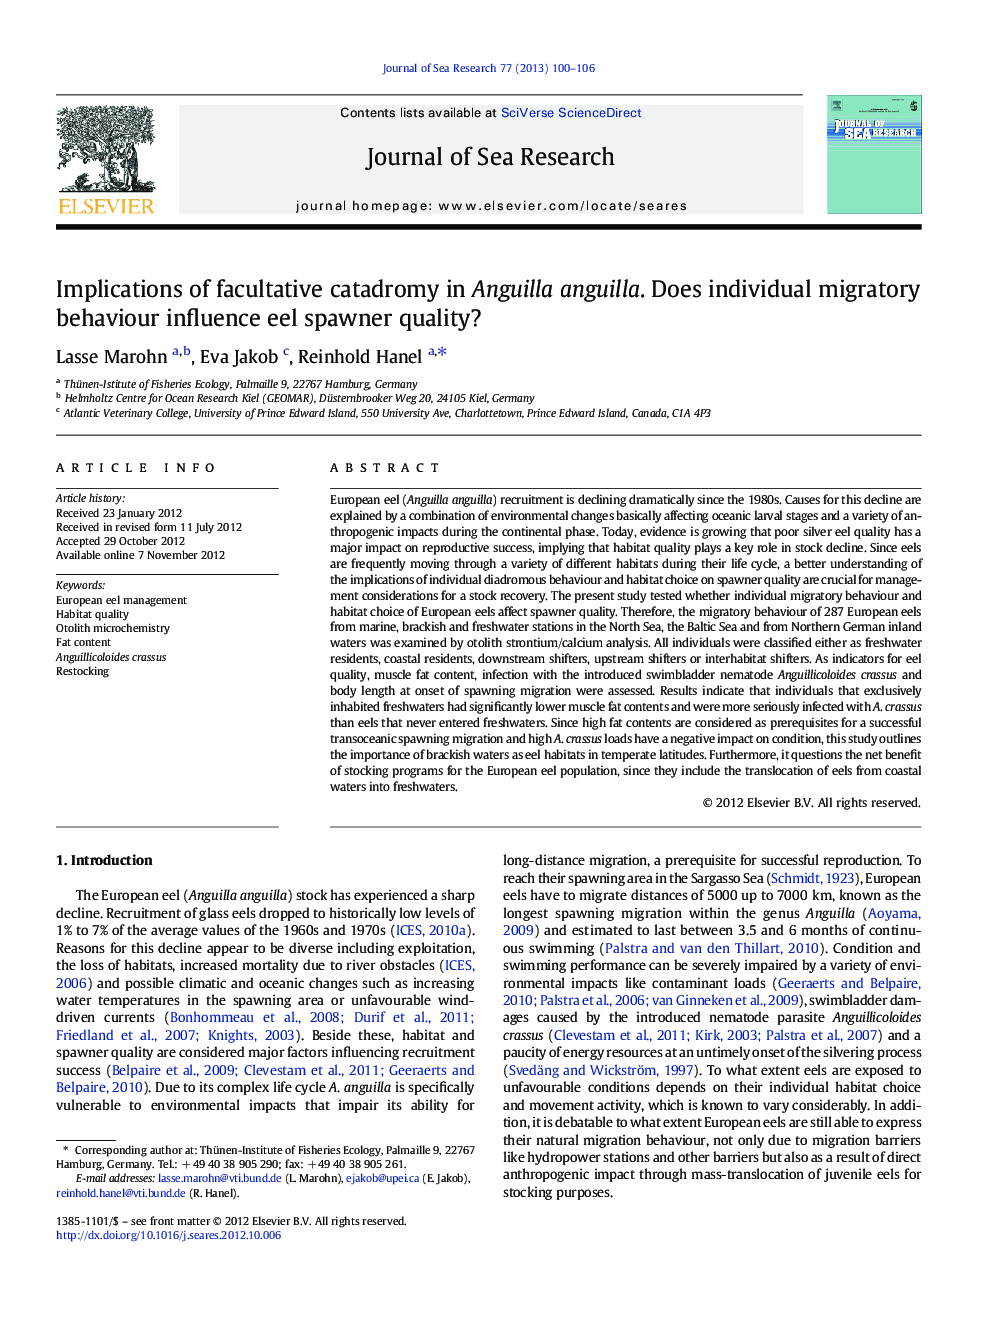 Implications of facultative catadromy in Anguilla anguilla. Does individual migratory behaviour influence eel spawner quality?